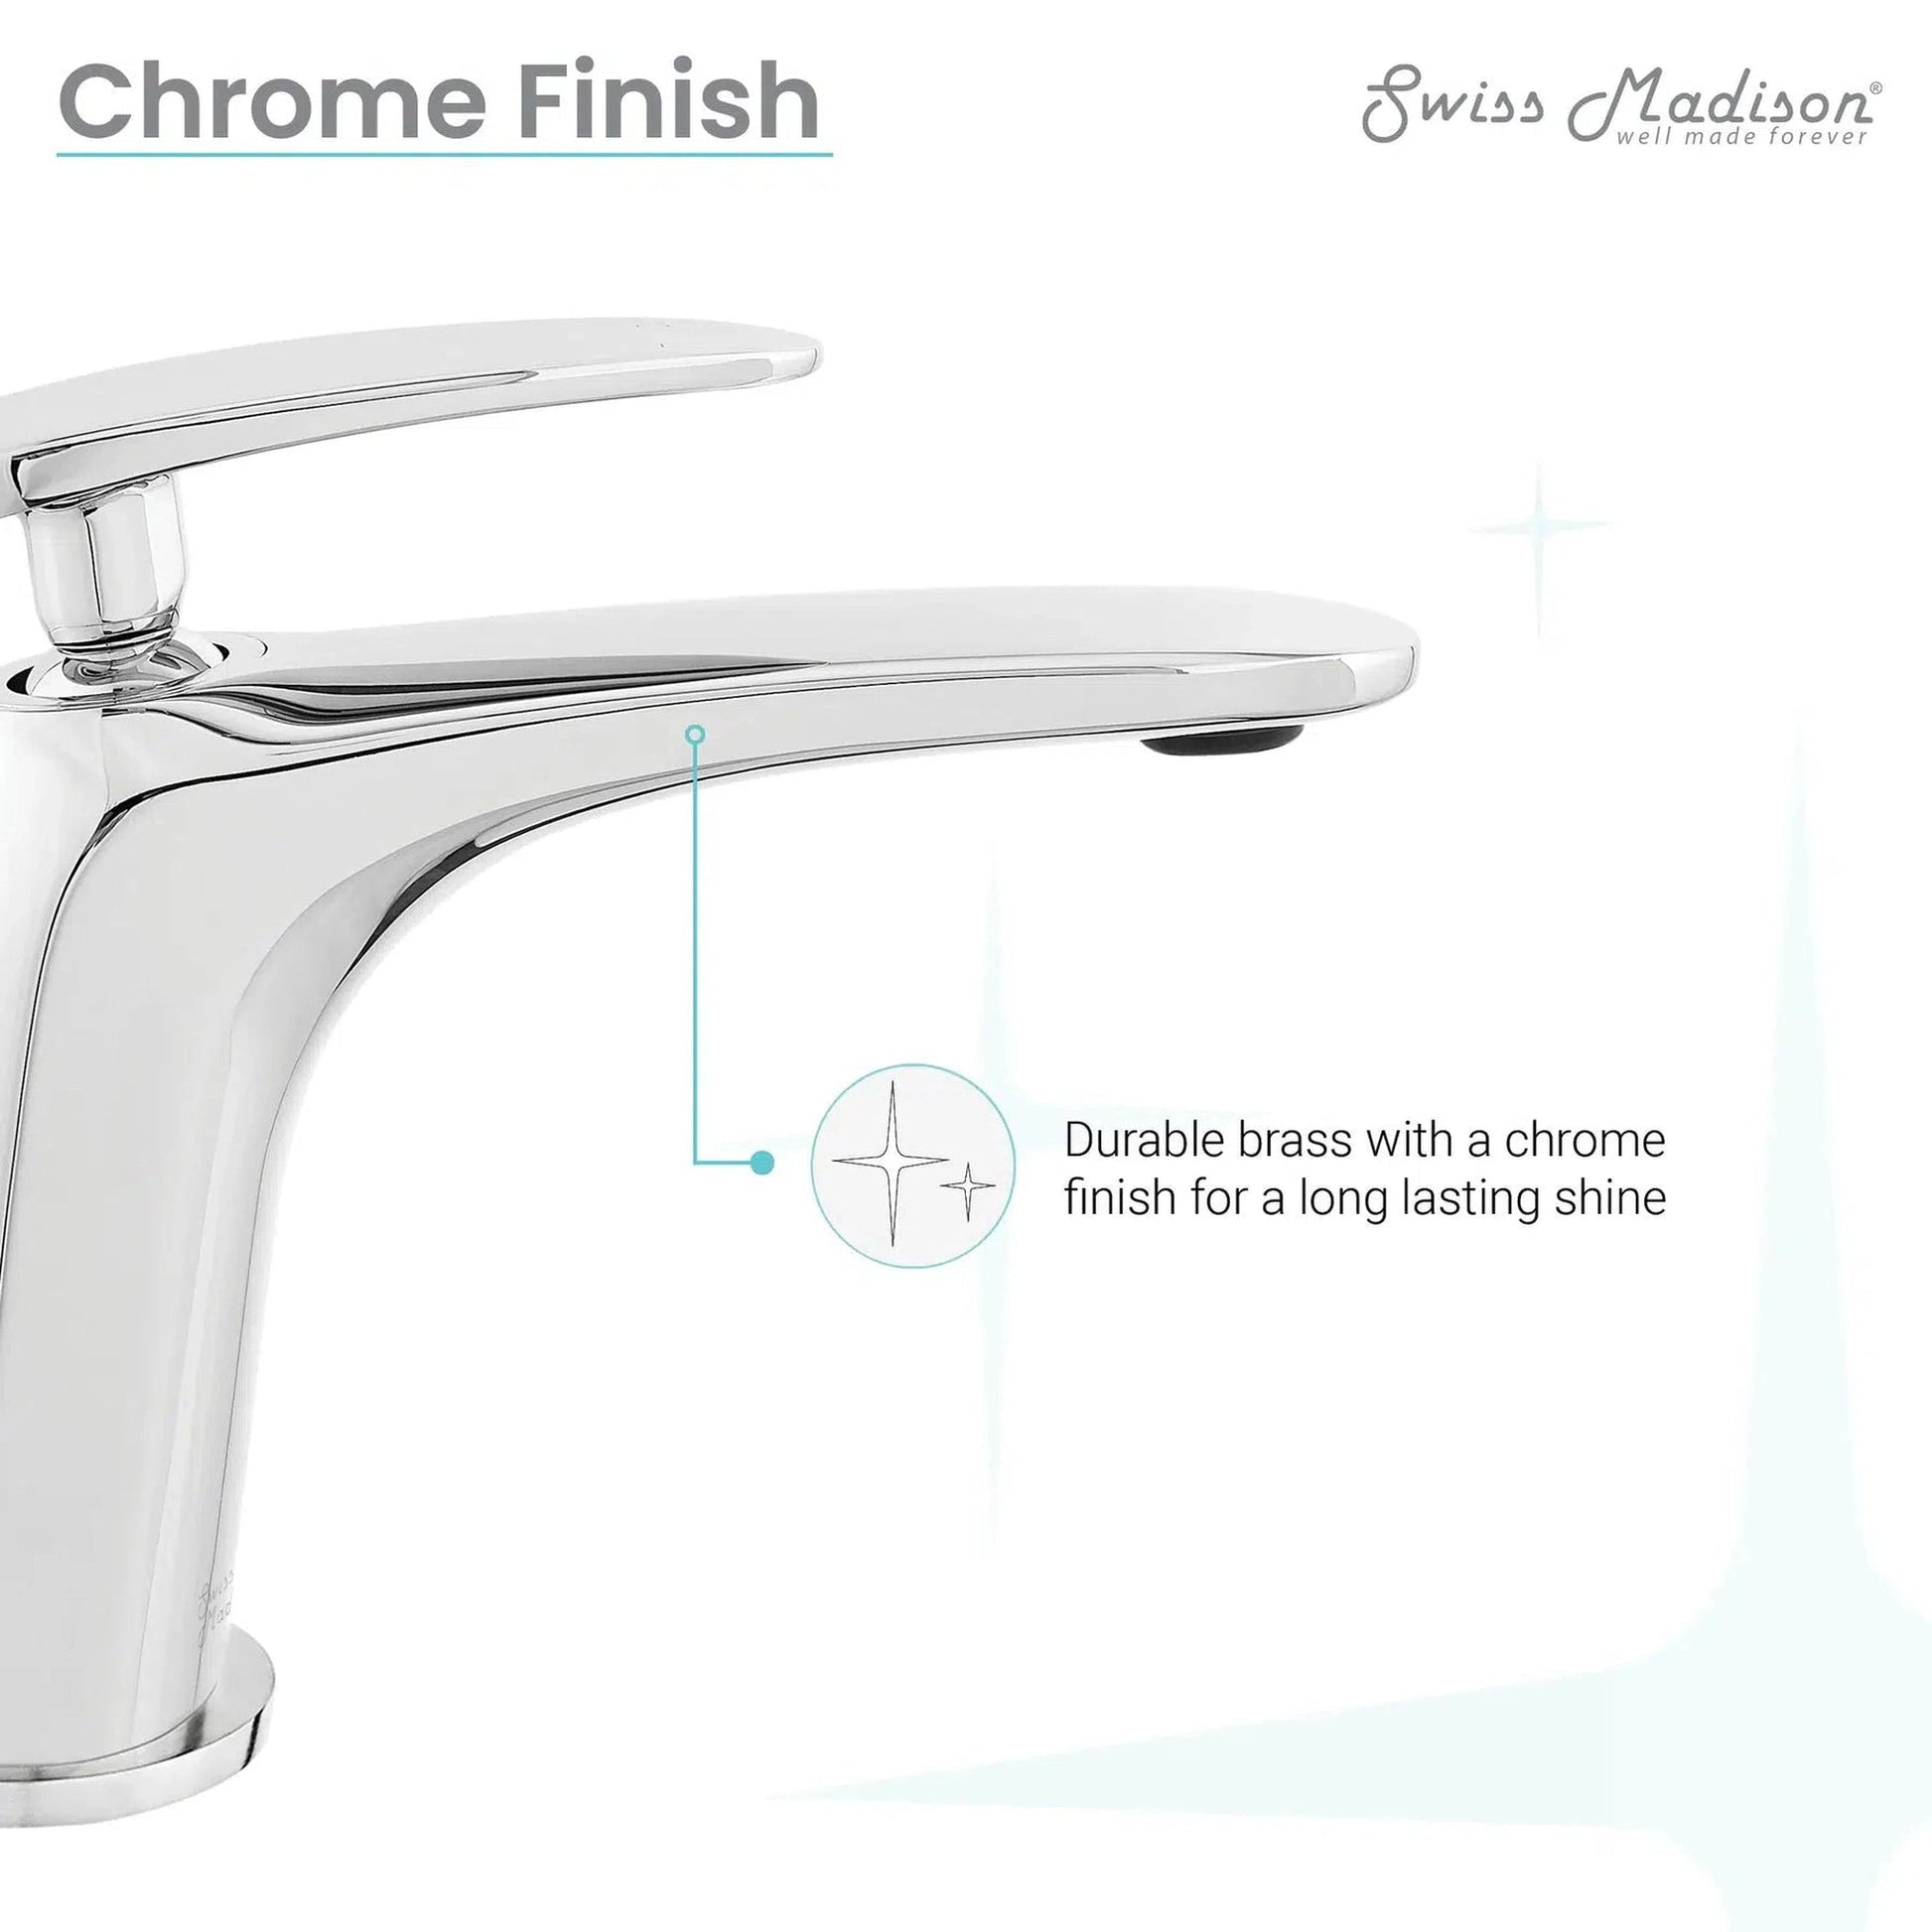 Swiss Madison Sublime 7" Chrome Single Hole Bathroom Faucet With Flow Rate of 1.2 GPM